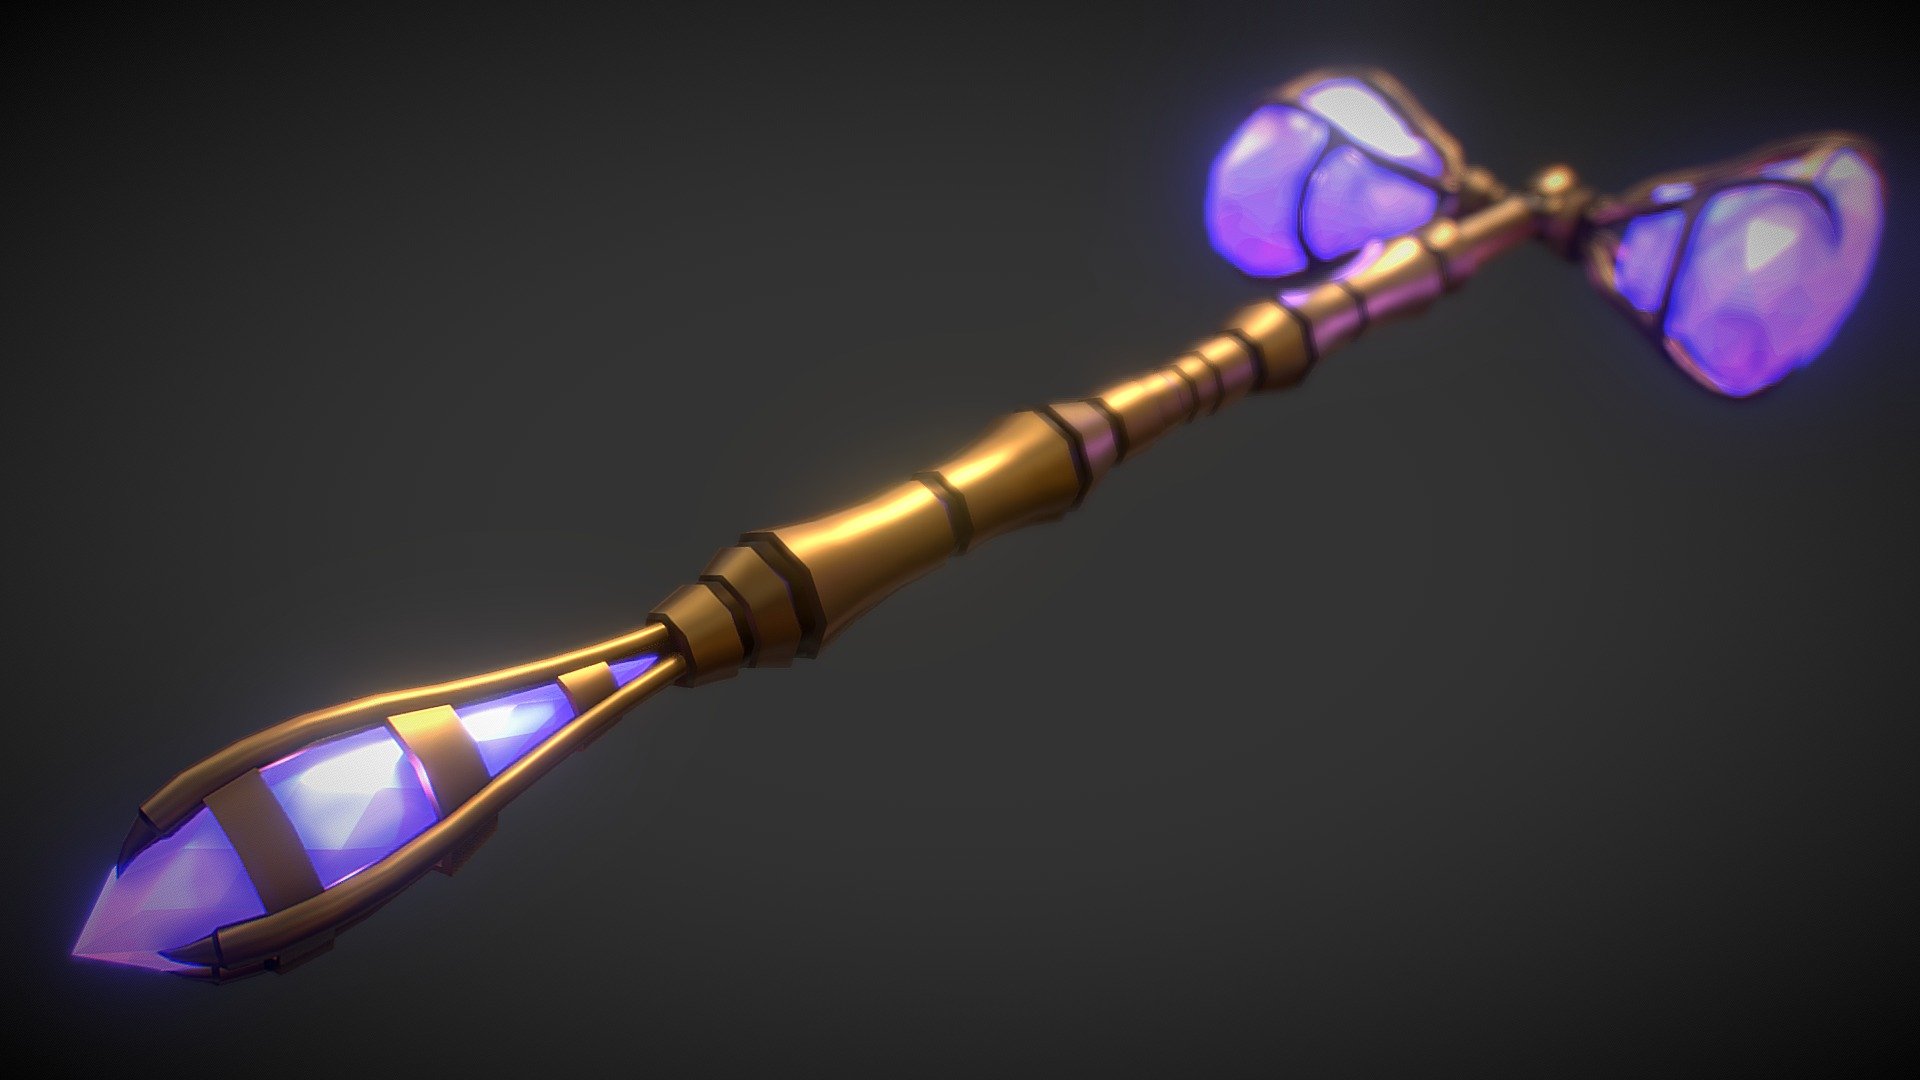 My very own design, though based on a previous model ..
5.5k triangles, mad in Blender.

was too lazy to UV map and add PBR textures&hellip;

DO NOT use this for any commercial purposes ! - Fantasy Hammer [Free] - Download Free 3D model by VertexDon (@Don42) 3d model